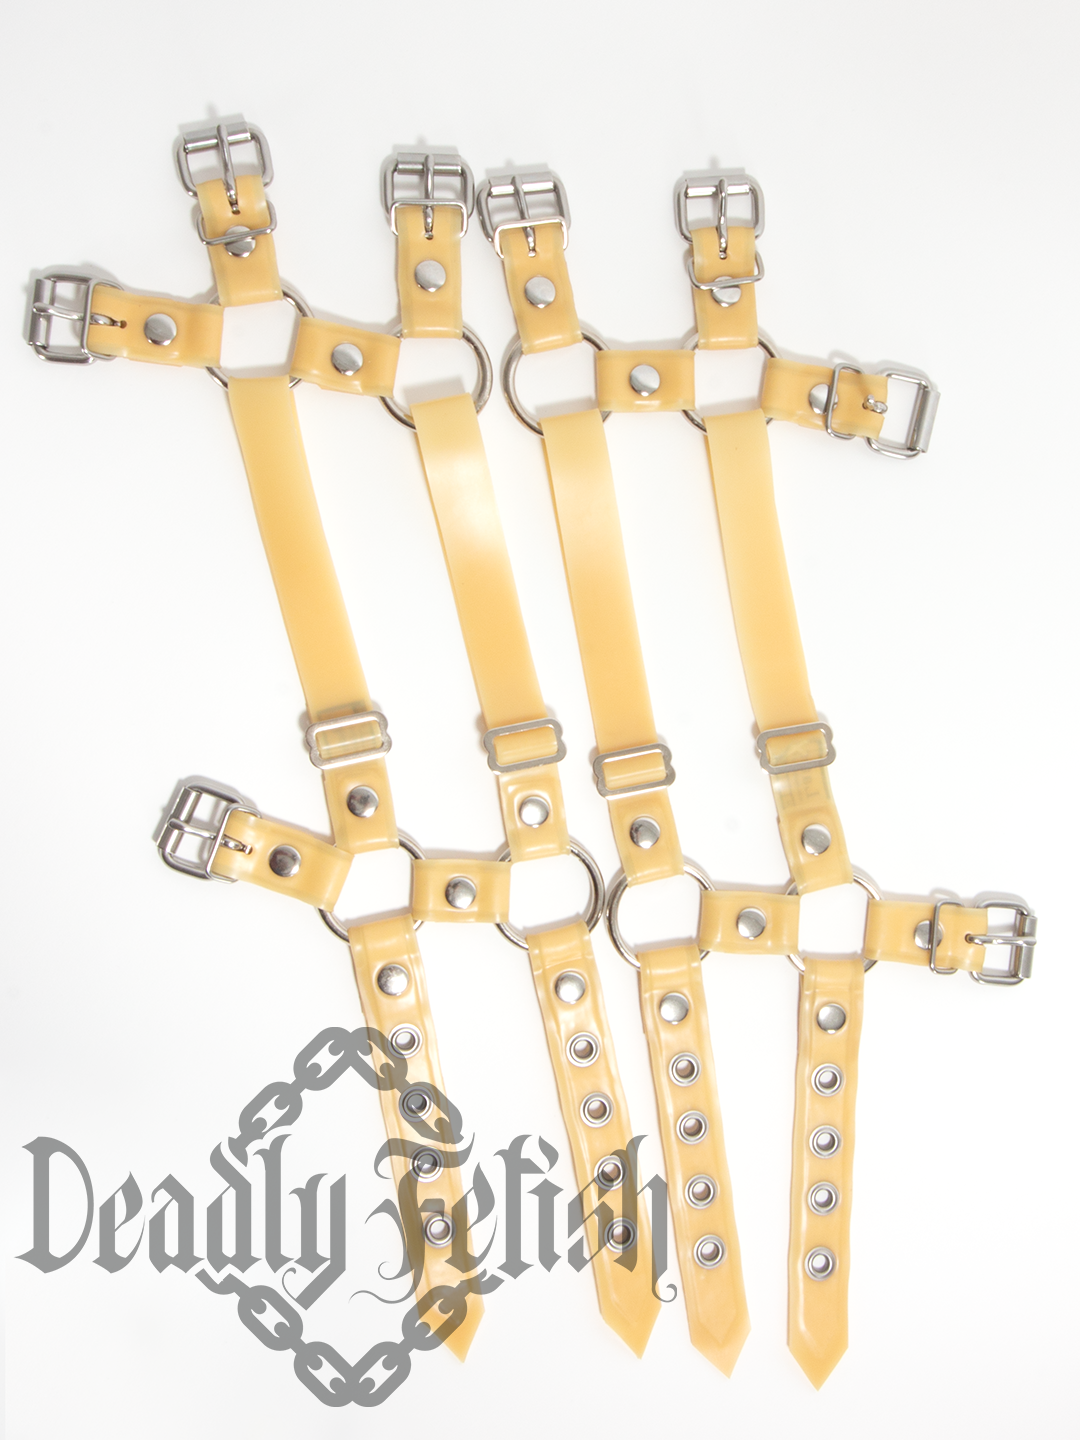 Deadly Fetish Latex: Harness Addition #05 Buckle Leg Straps